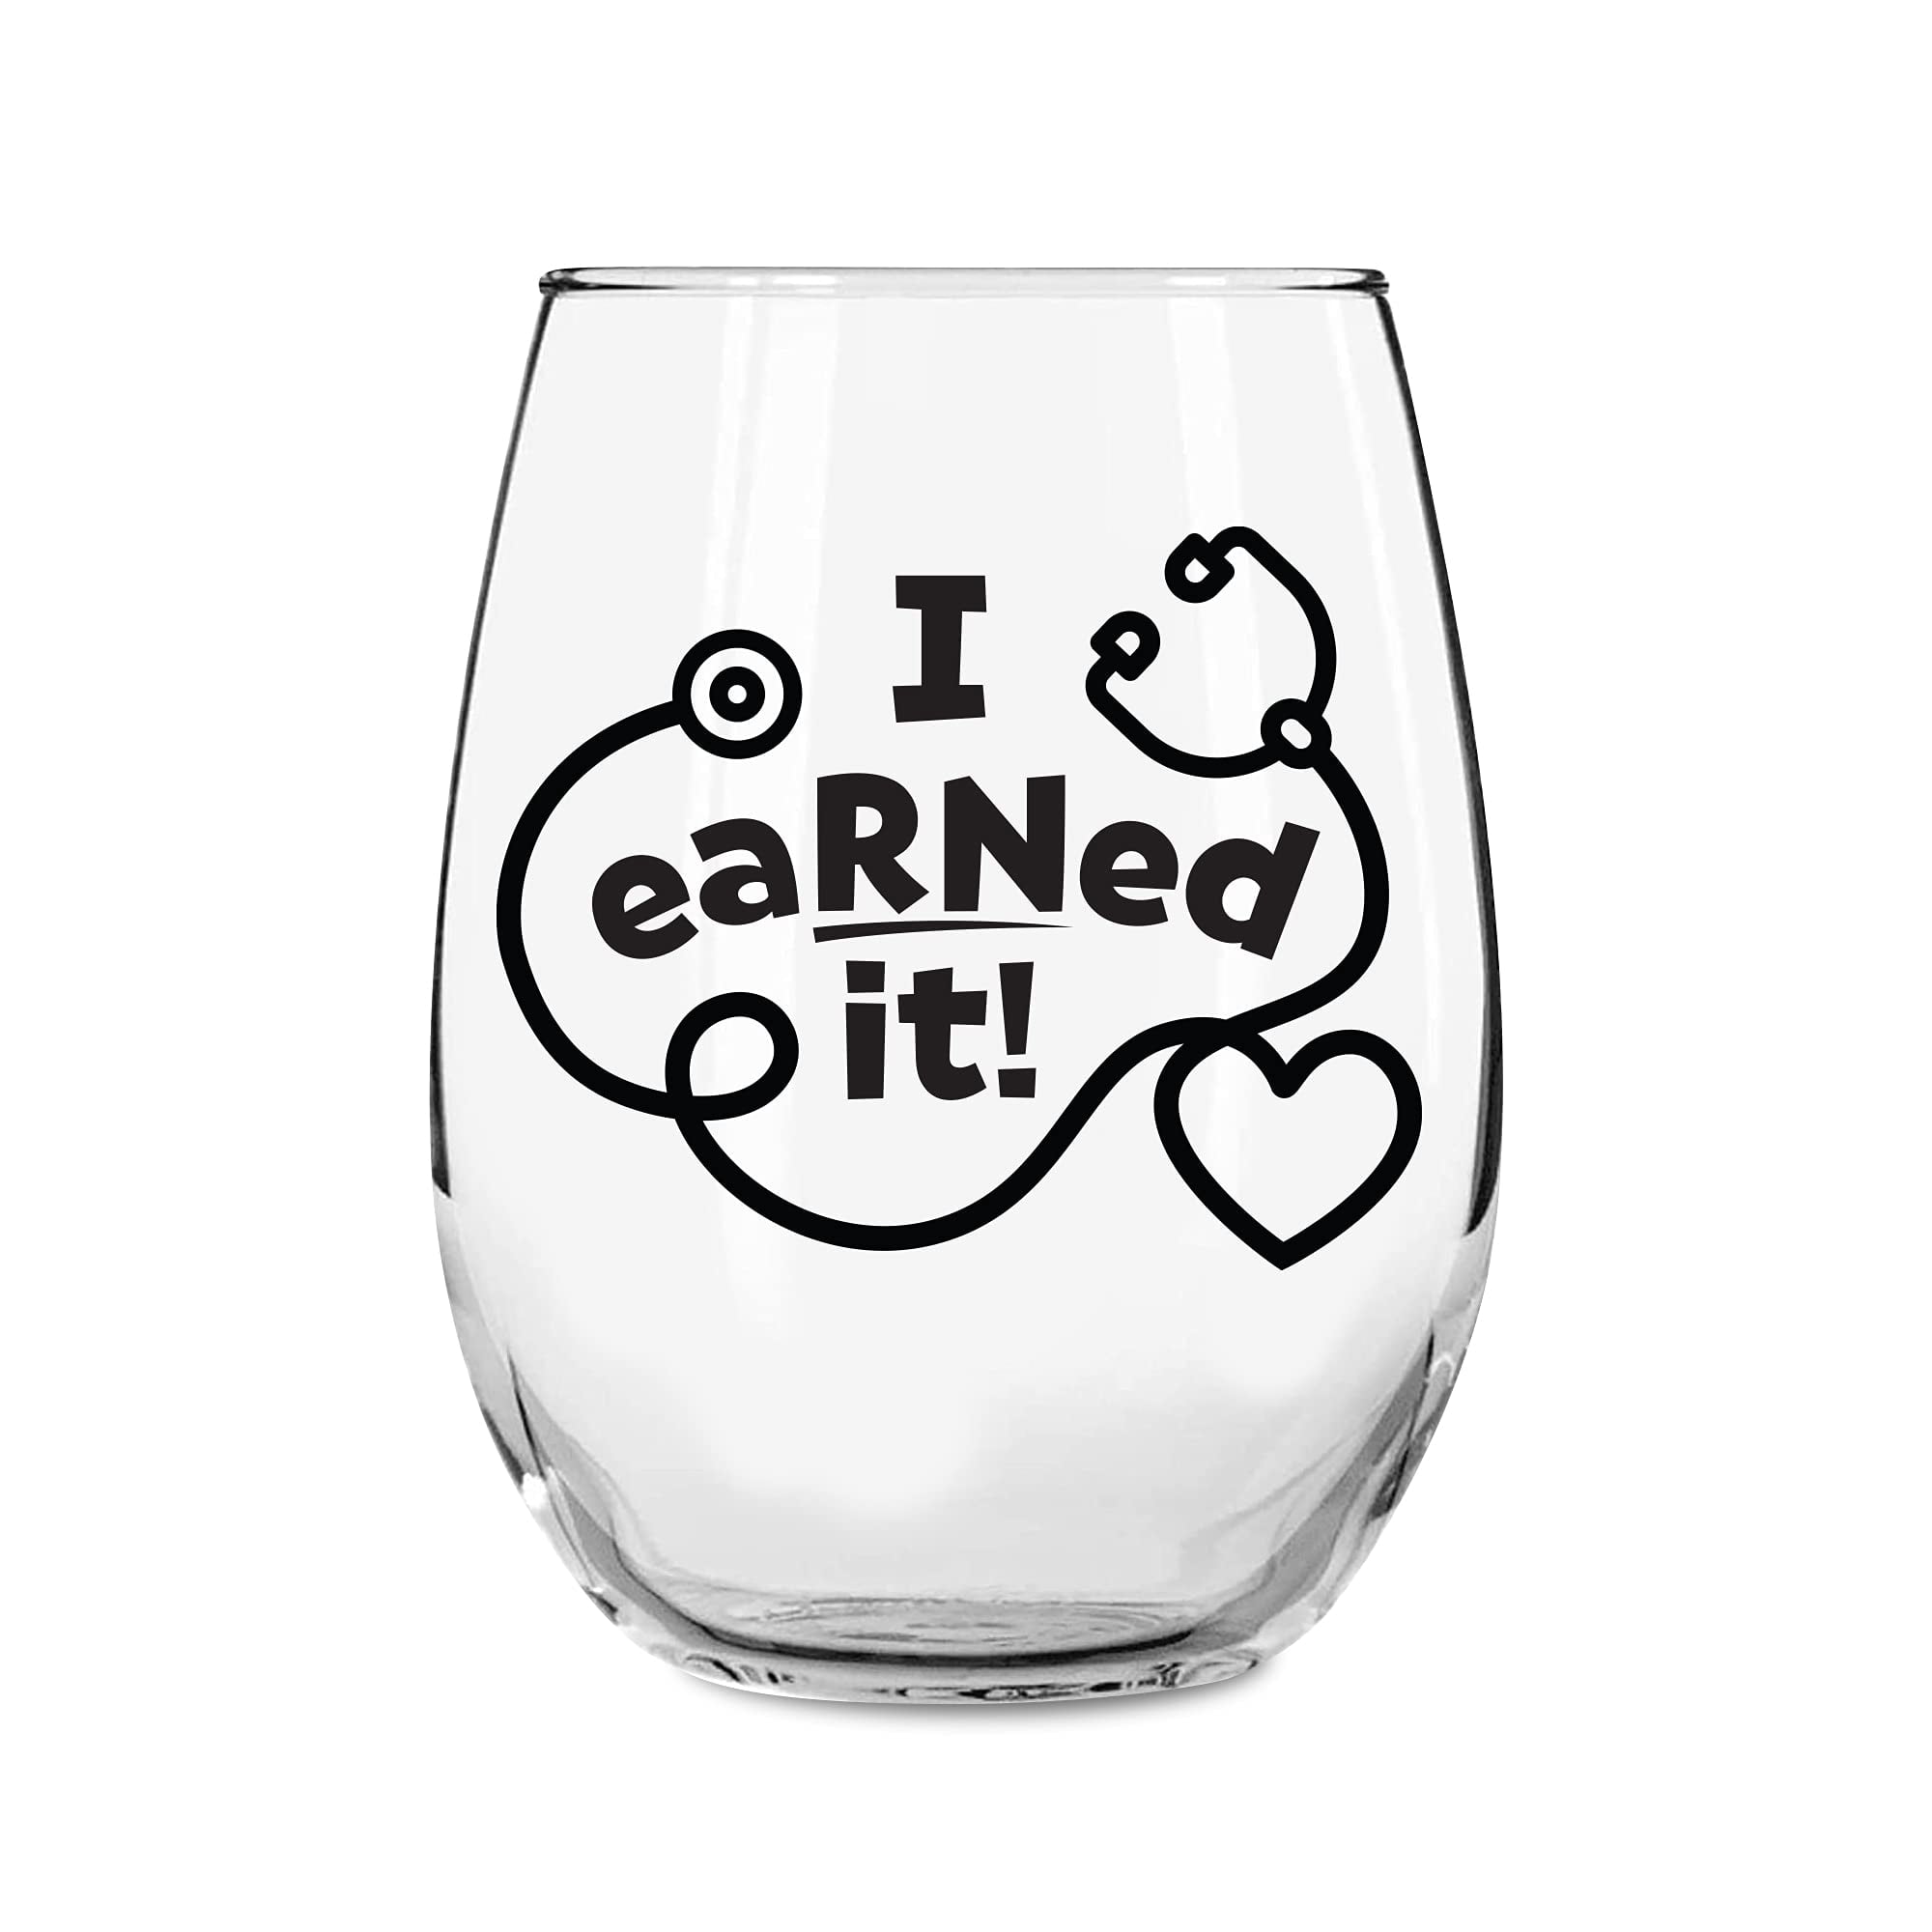 I Earned It Funny Stemless Wine Glass 15oz Wine Glasses - Cute Funny  Registered Nurse Stemless Wine Glass - Novelty Healthcare Themed Gifts or  Party Decor for Women and Men by Momstir -